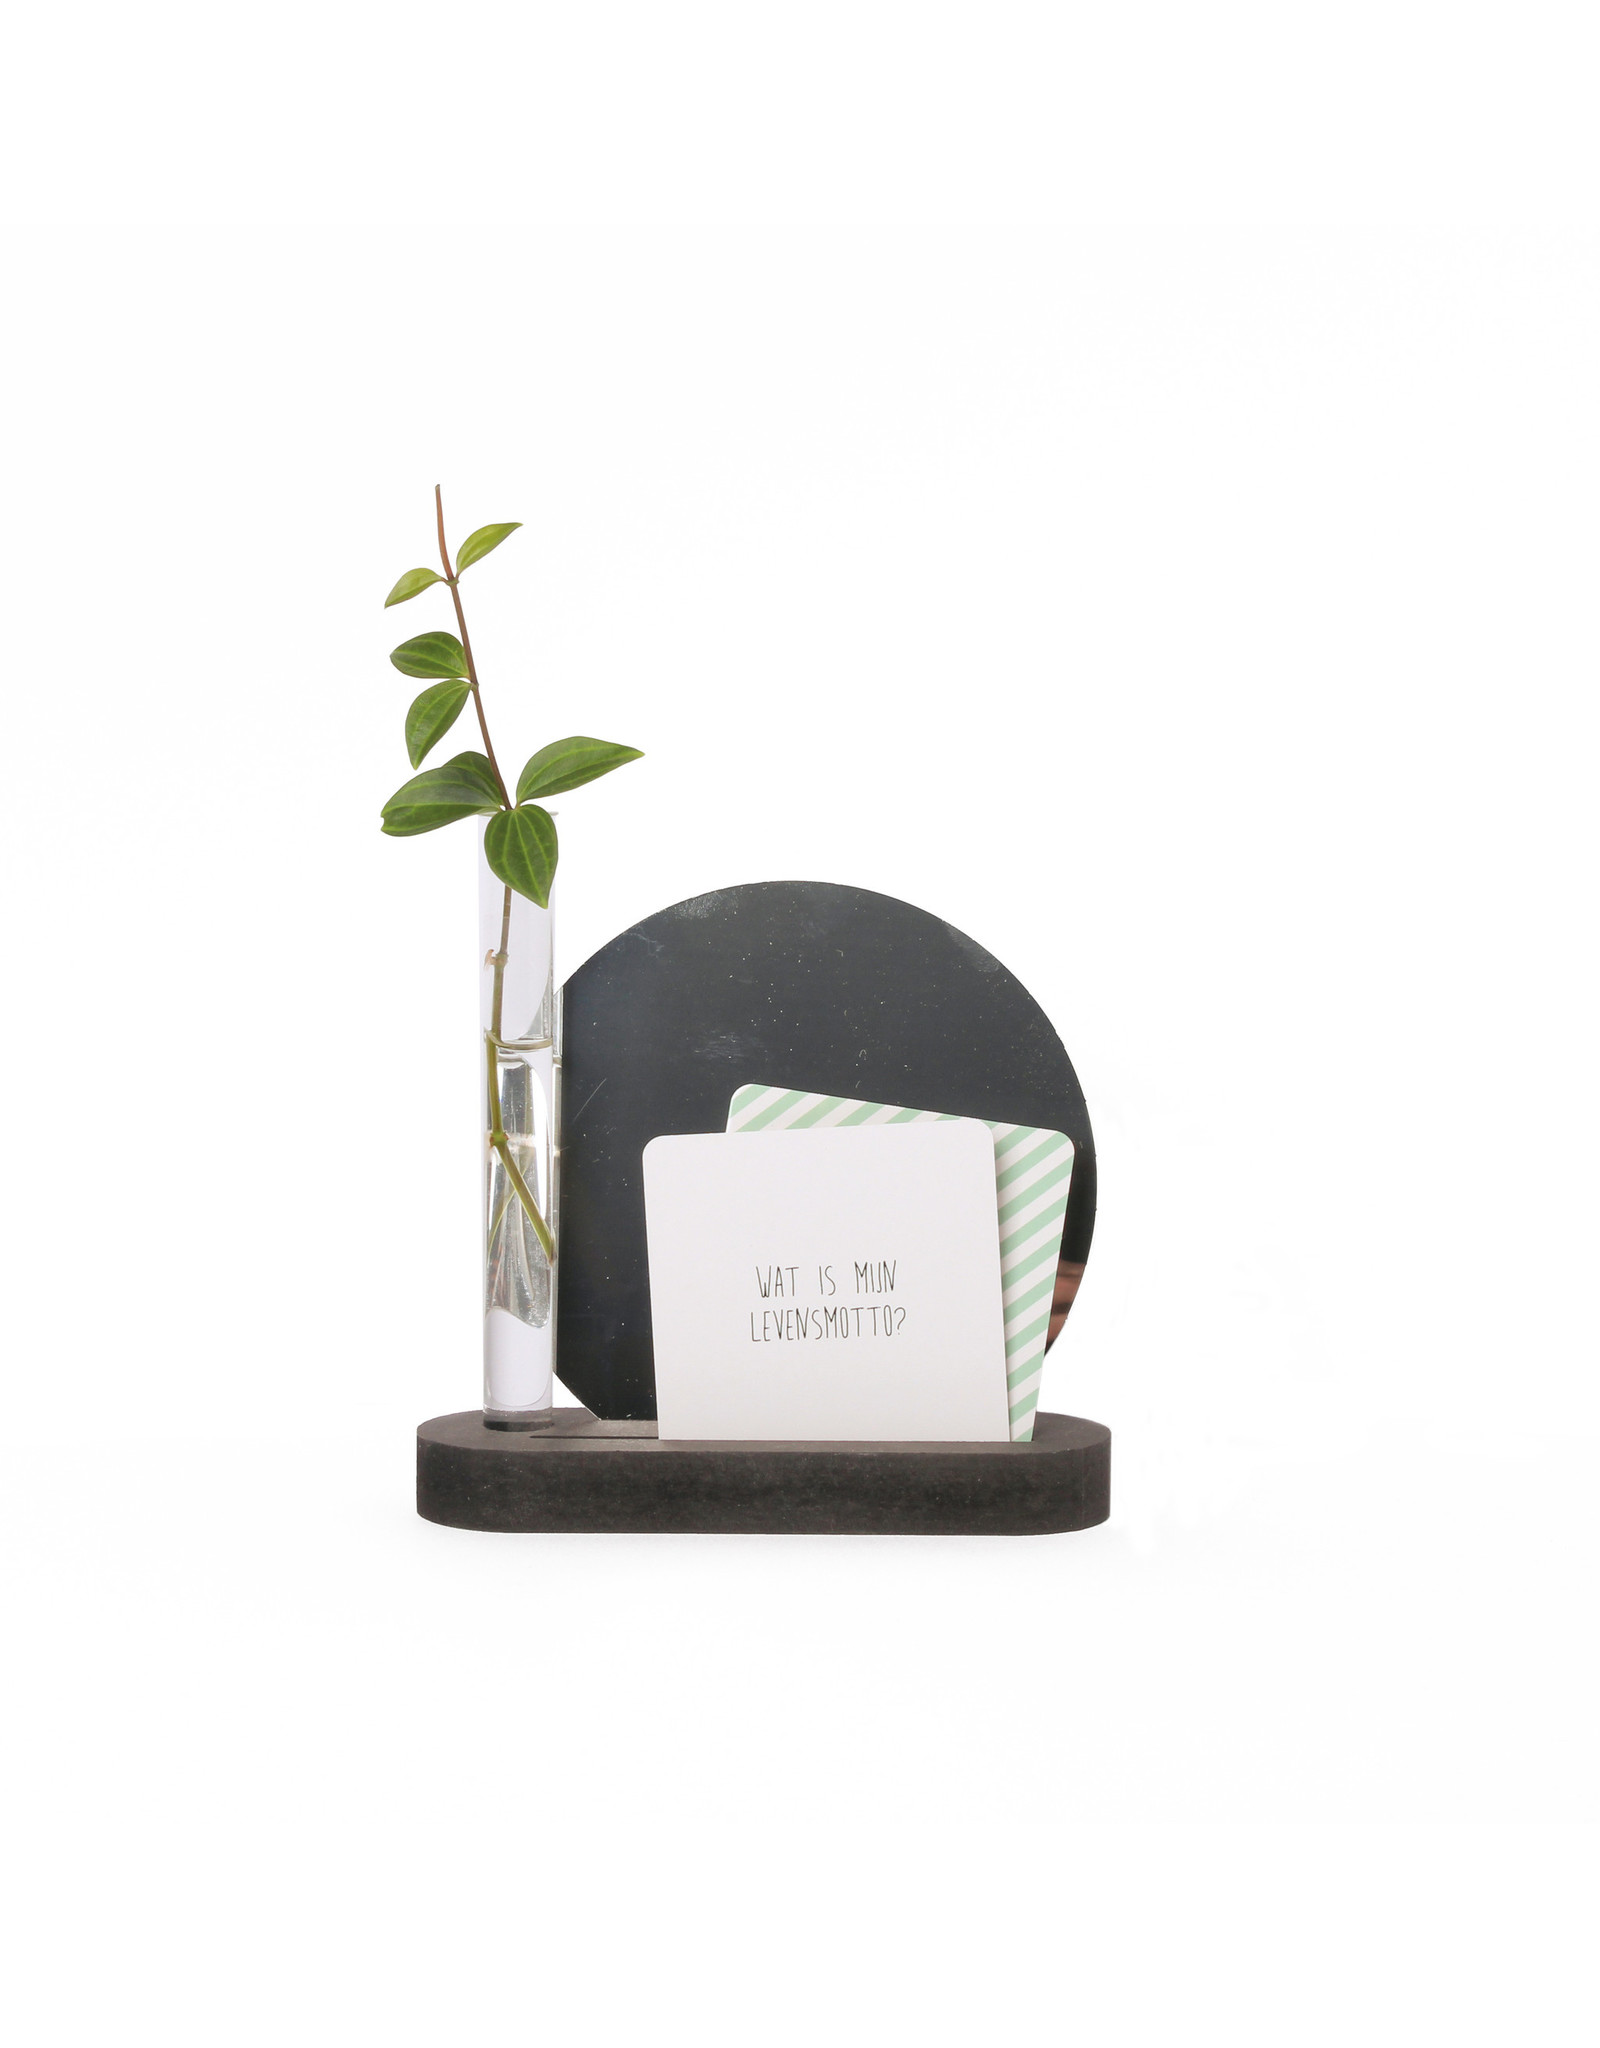 By WOOM |  Holder with vase, card and mirror